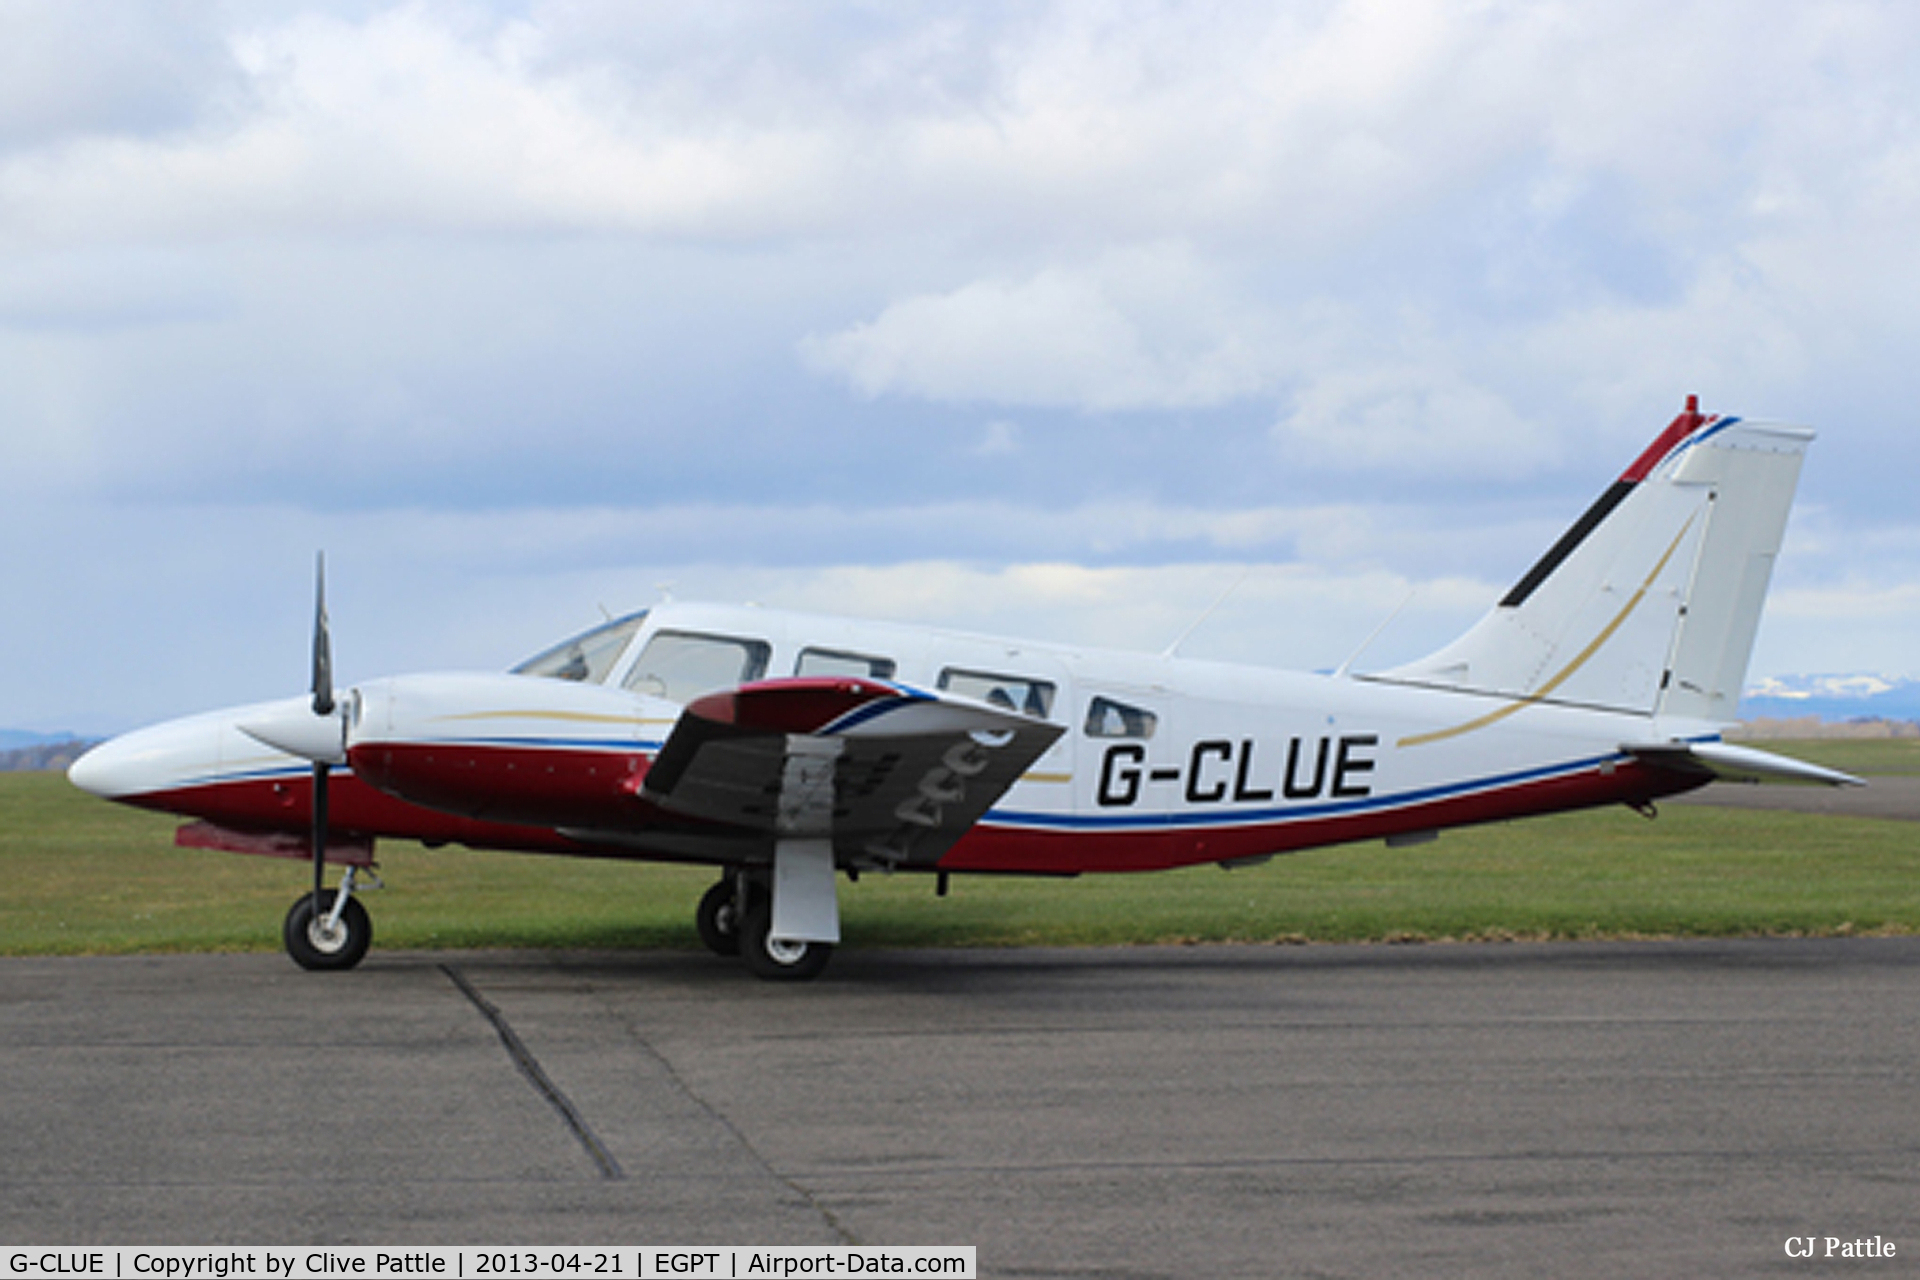 G-CLUE, 1979 Piper PA-34-200T Seneca II C/N 34-7970502, Parked up at Perth EGPT